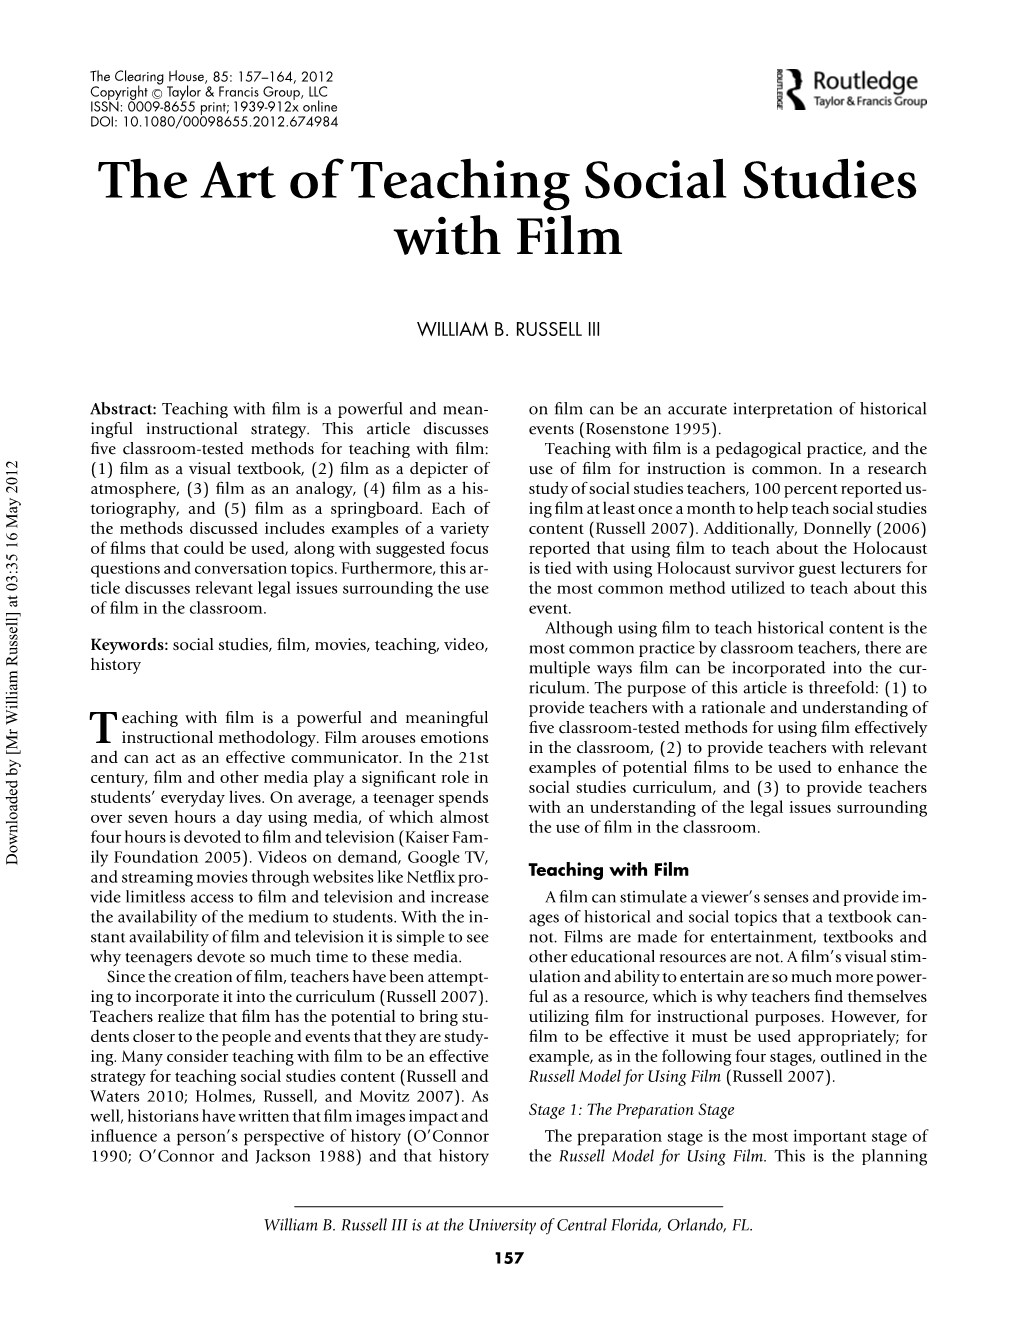 The Art of Teaching Social Studies with Film